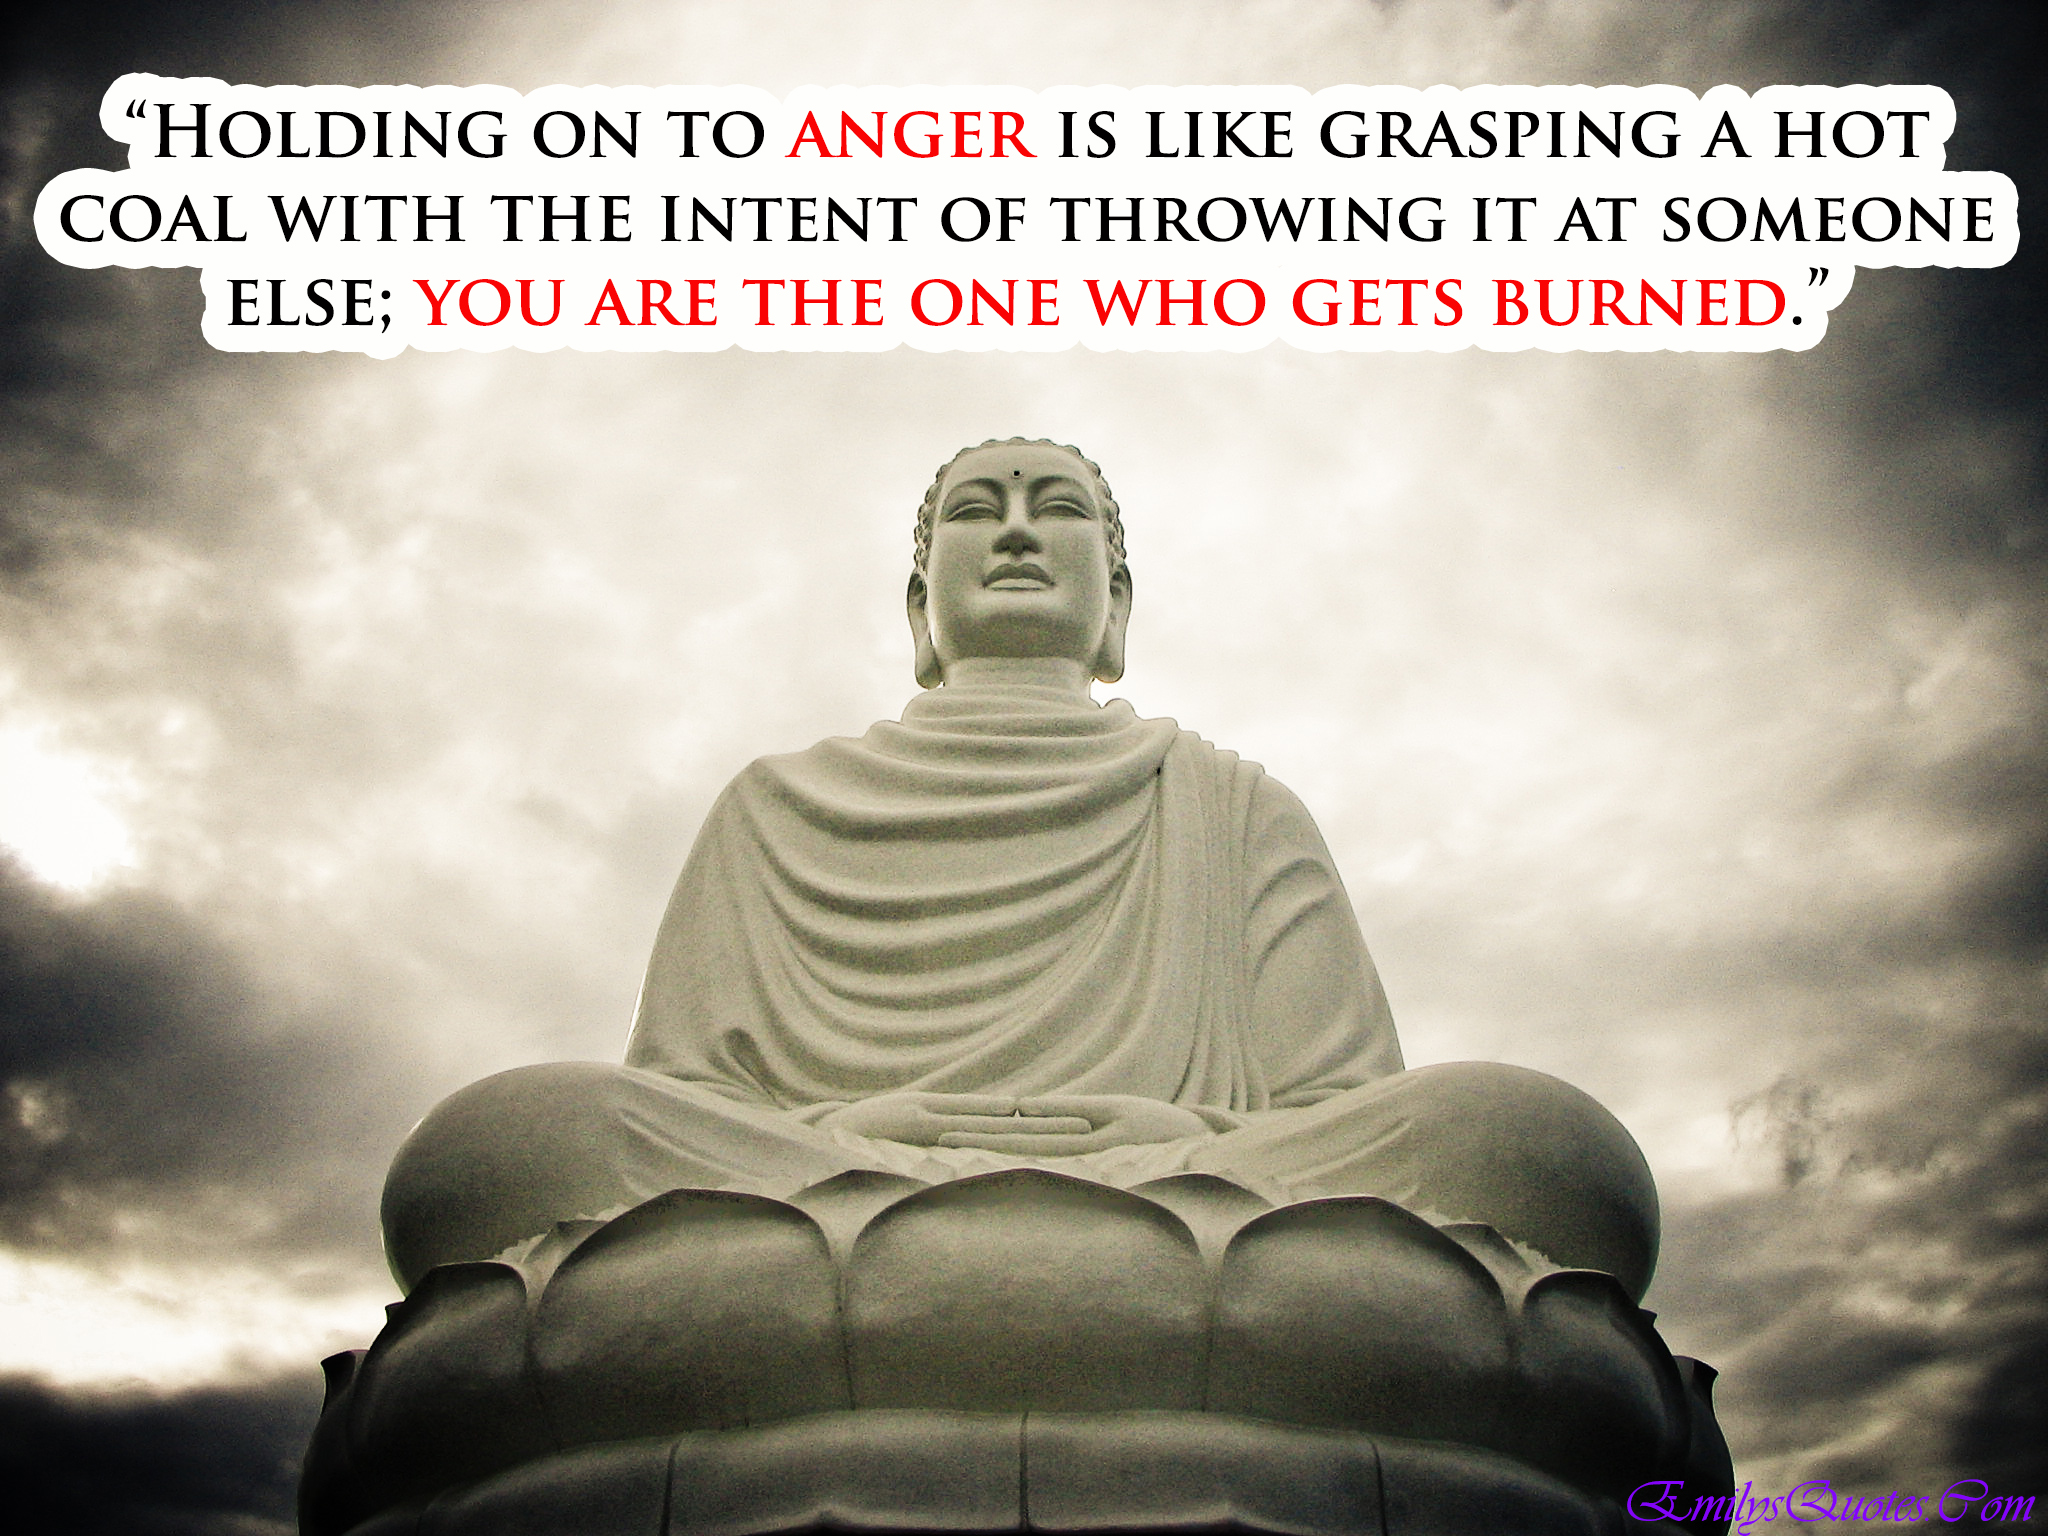 Holding on to anger is like grasping a hot coal with the intent of